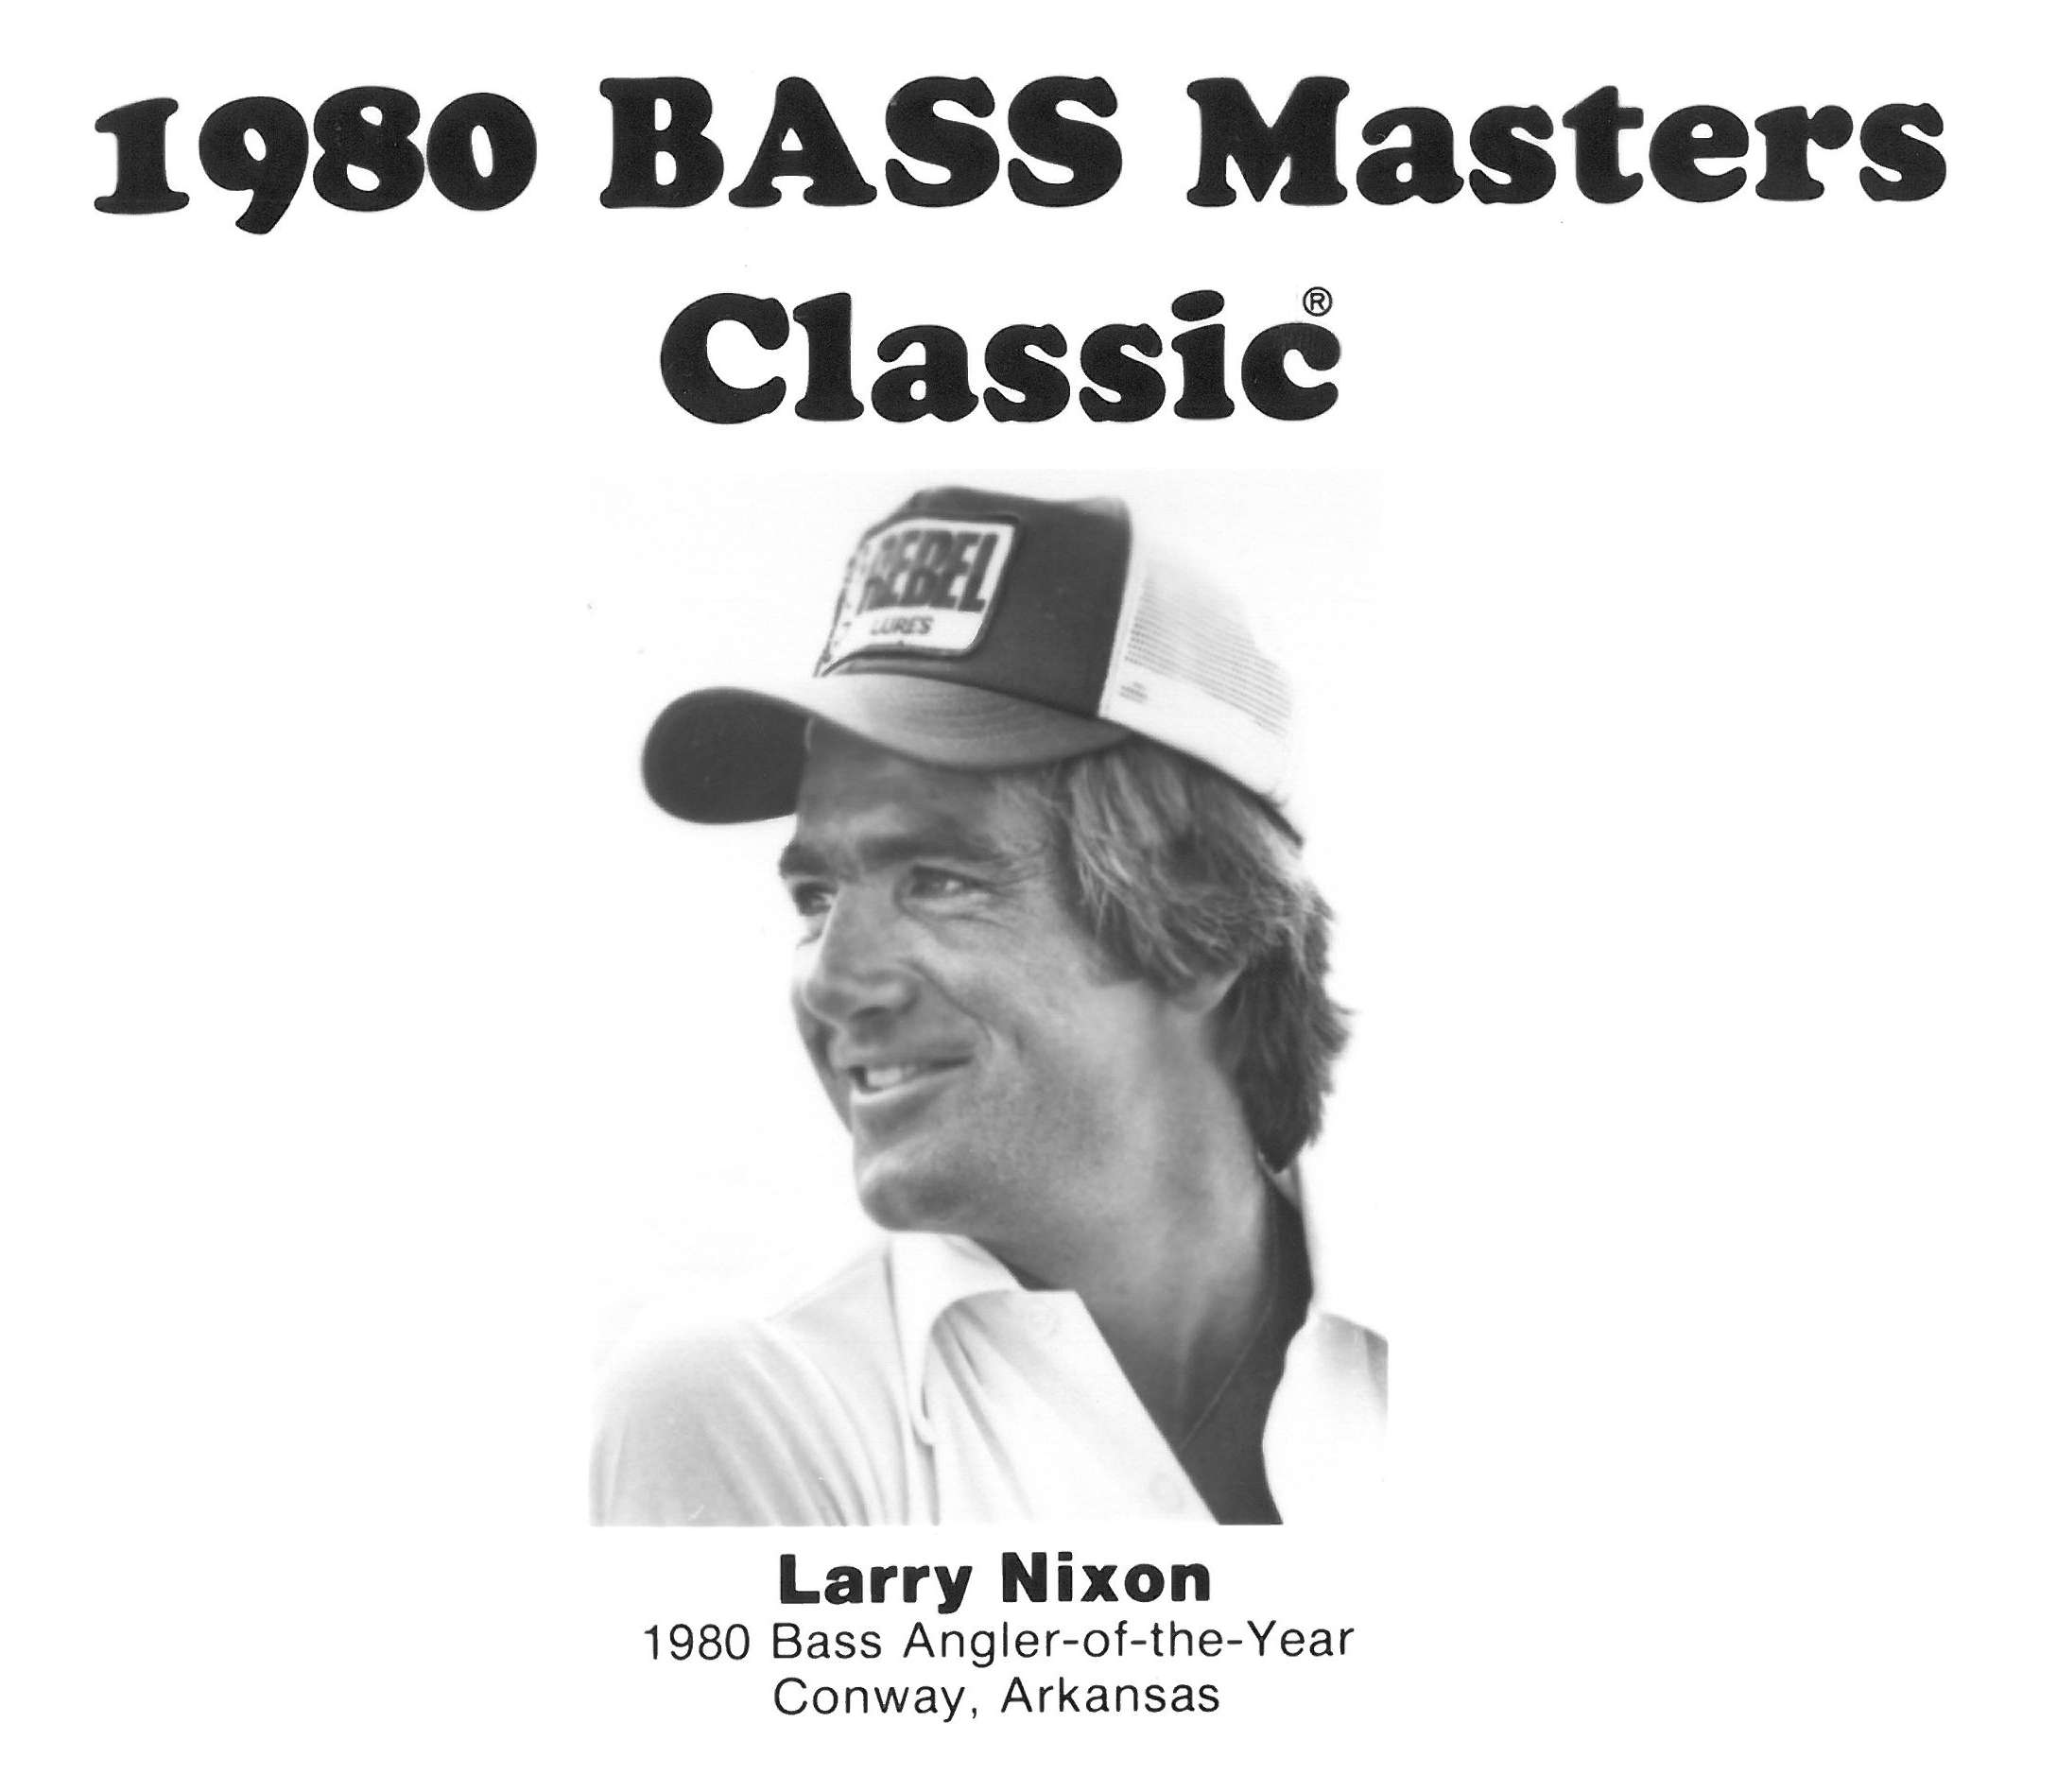 <b>1980</b><br>Larry Nixon was one of those new faces, and he won his first AOY in the 1980 season.